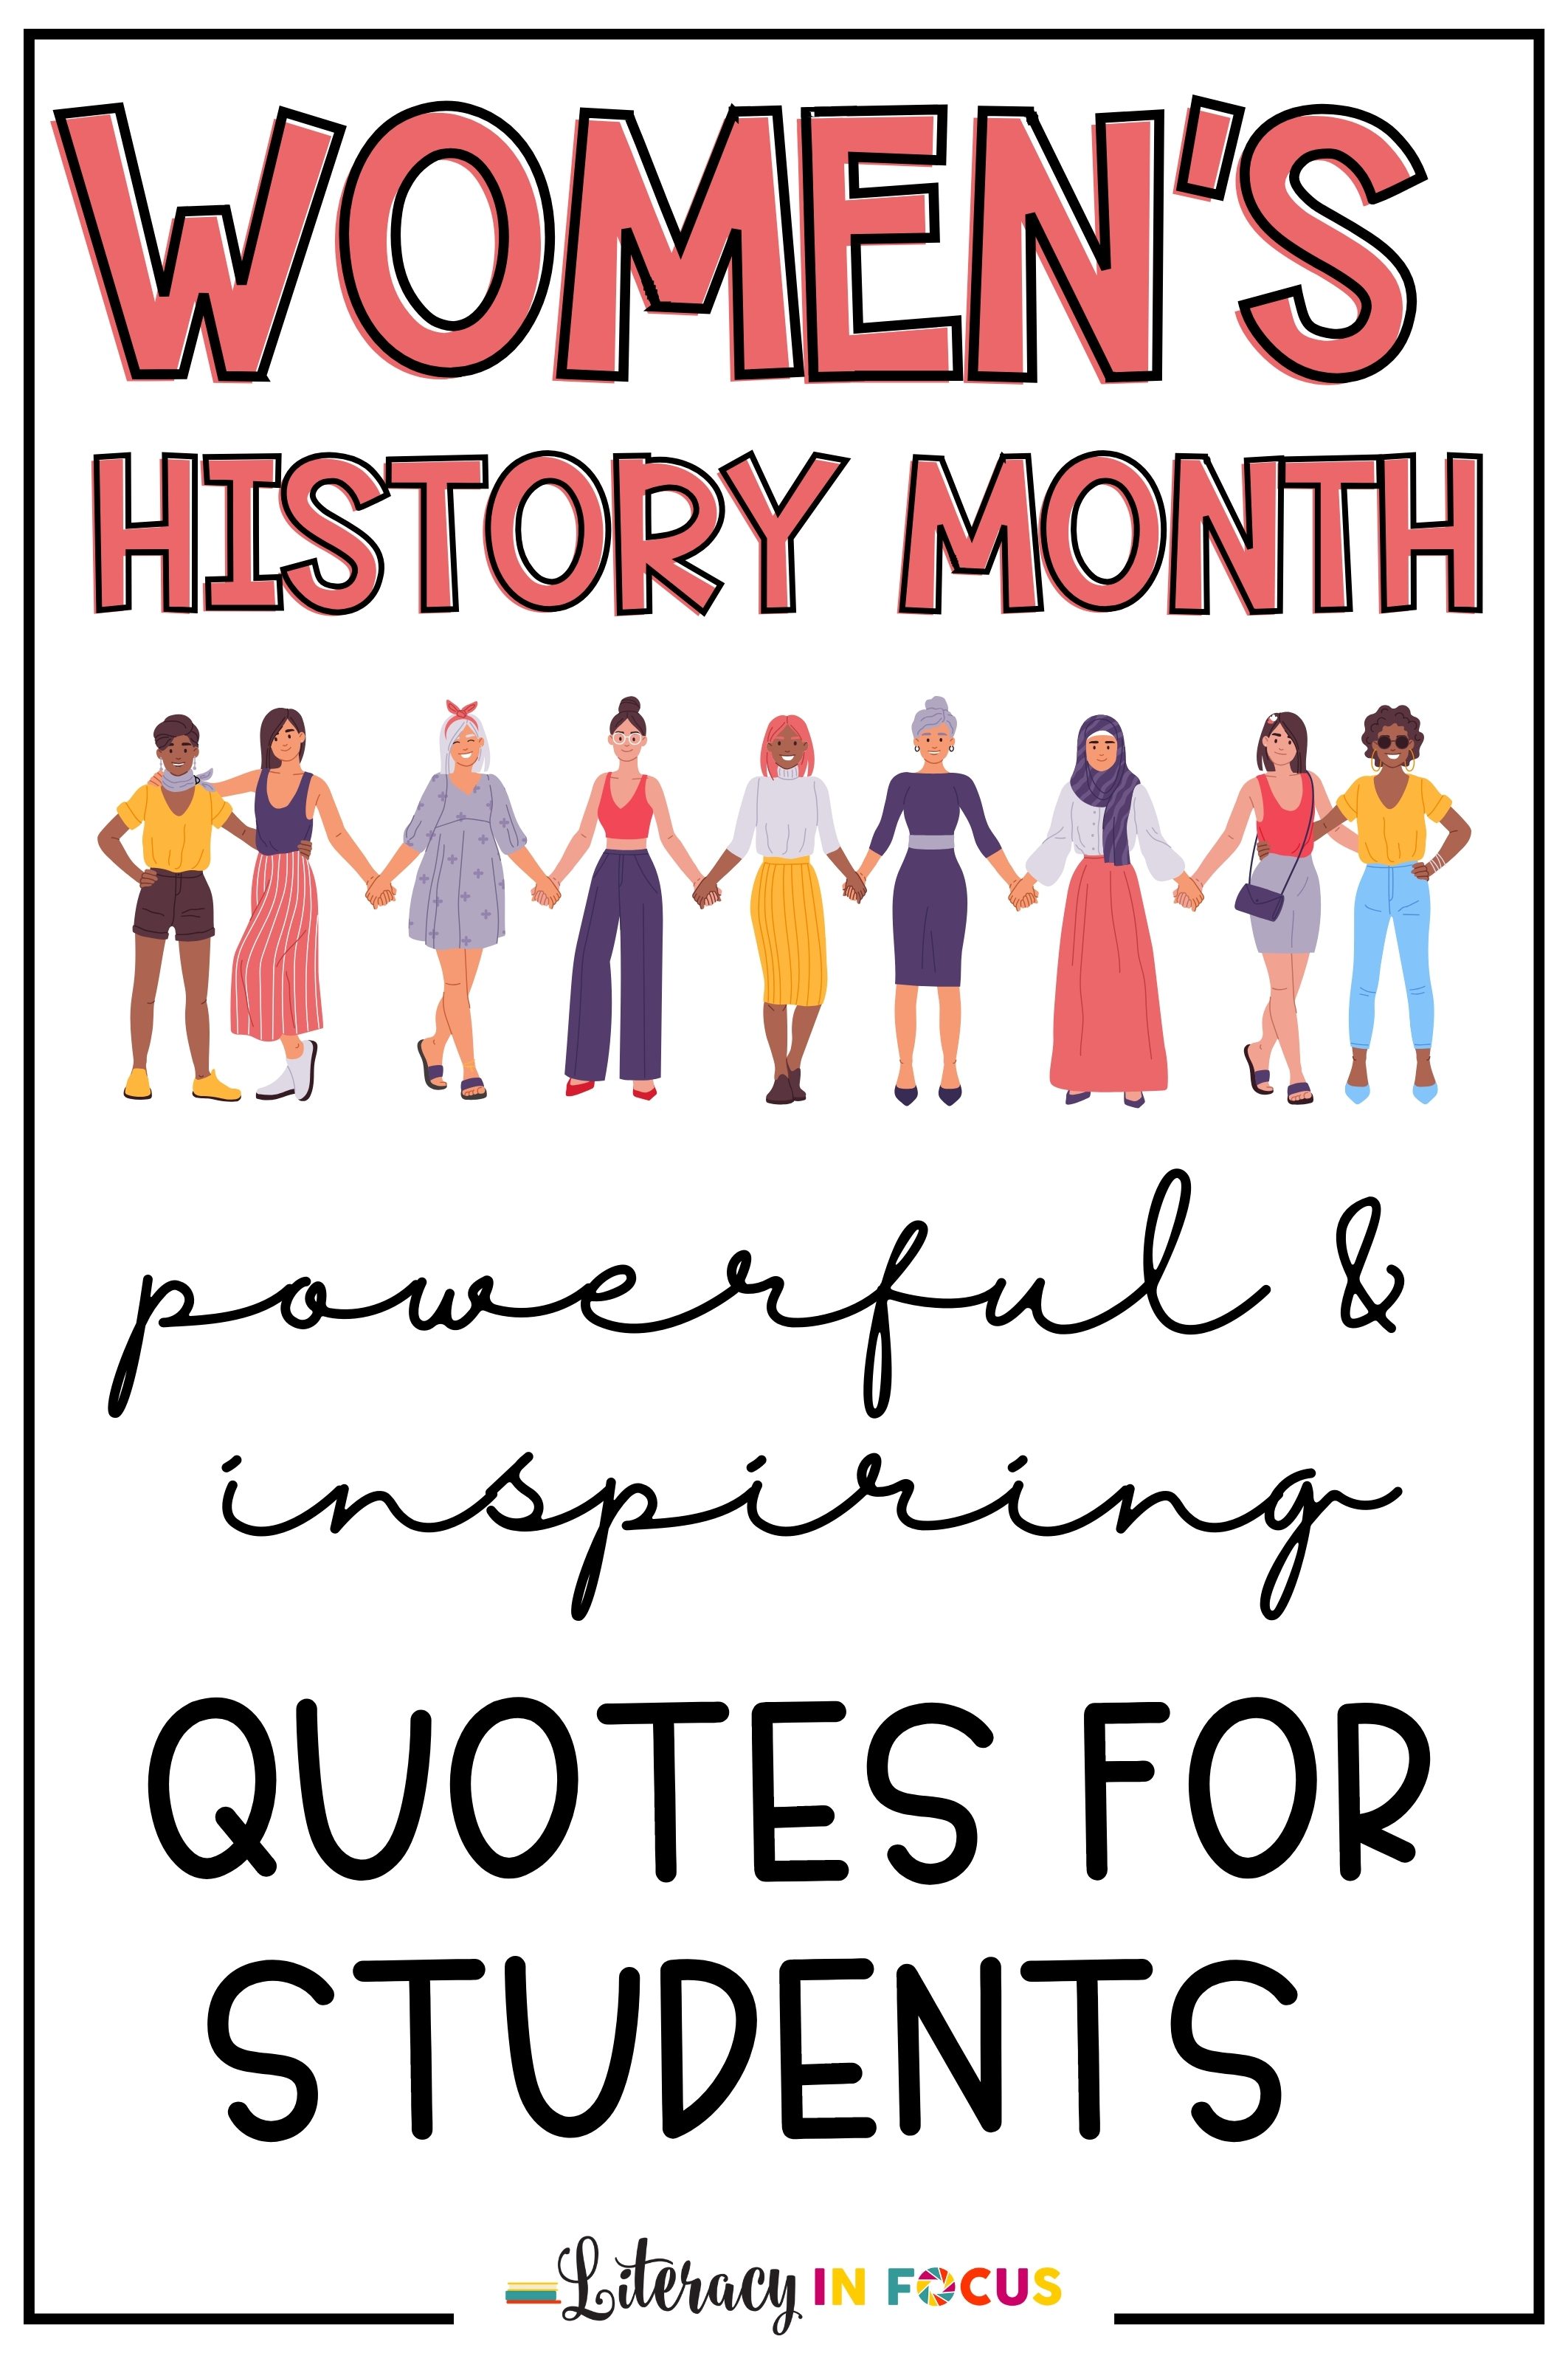 Powerful Women’s History Month Quotes & Prompts for Students